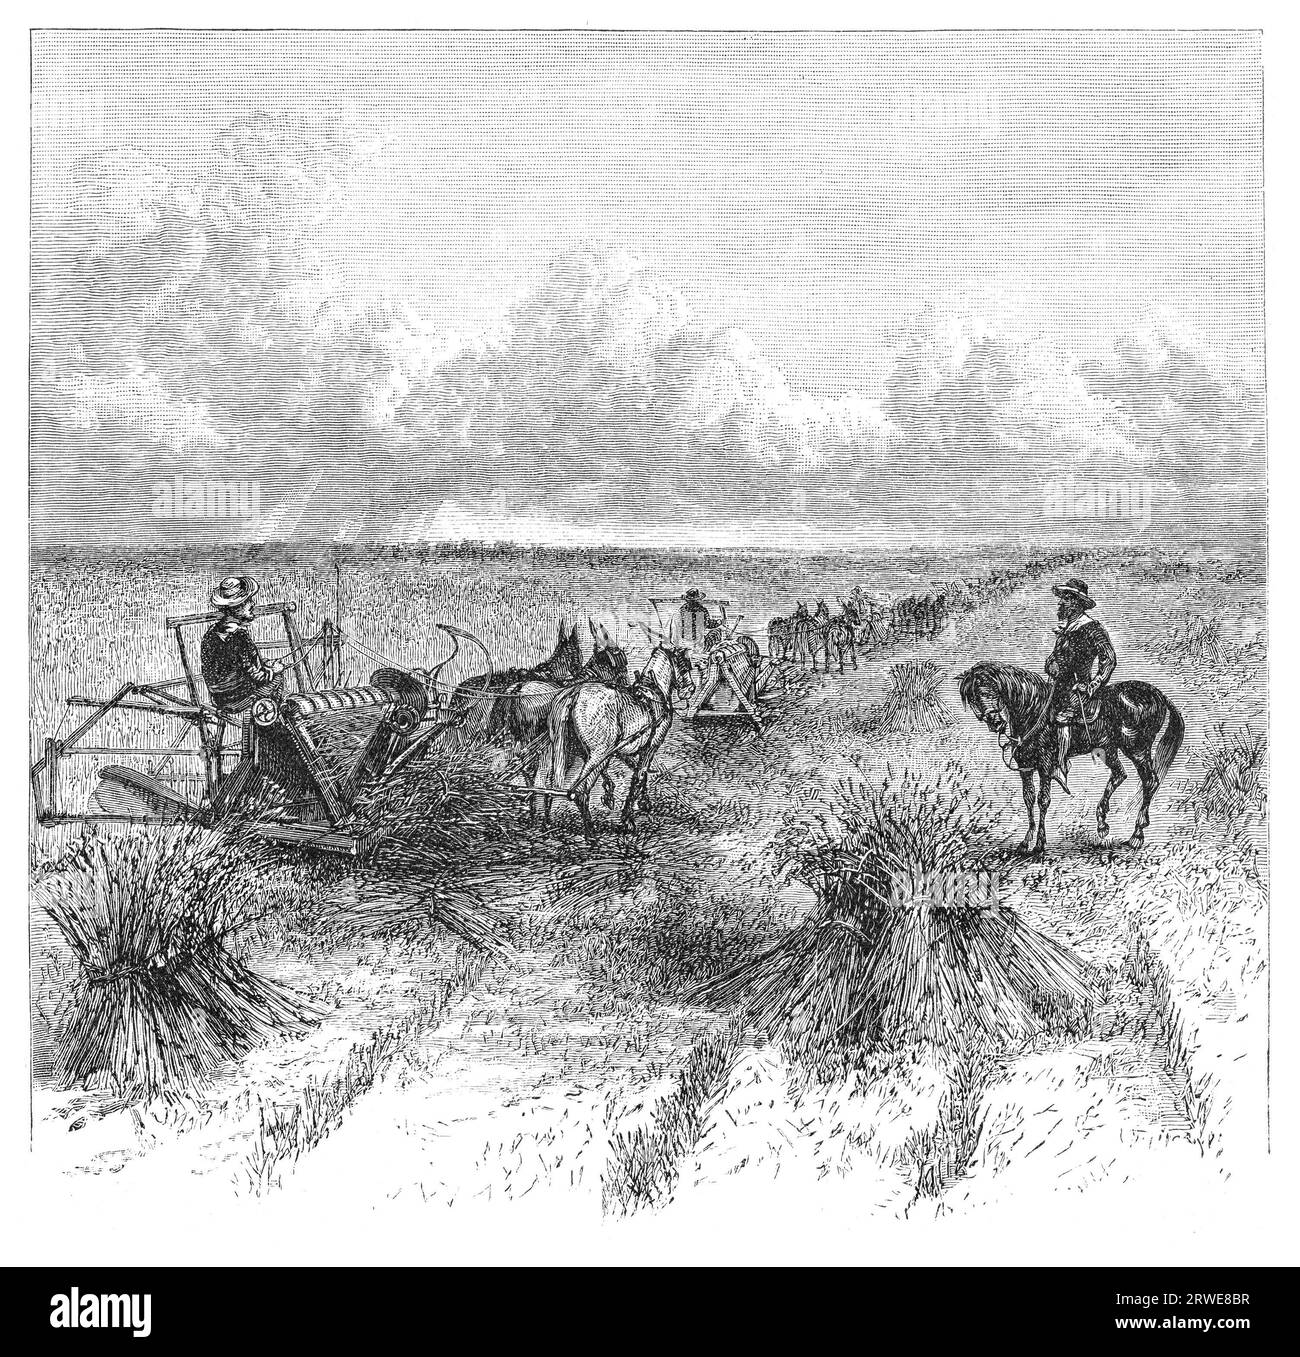 Agriculture in Dakota, USA: Reaping. Image source: Harpers Monthly magazine march 1880 Stock Photo